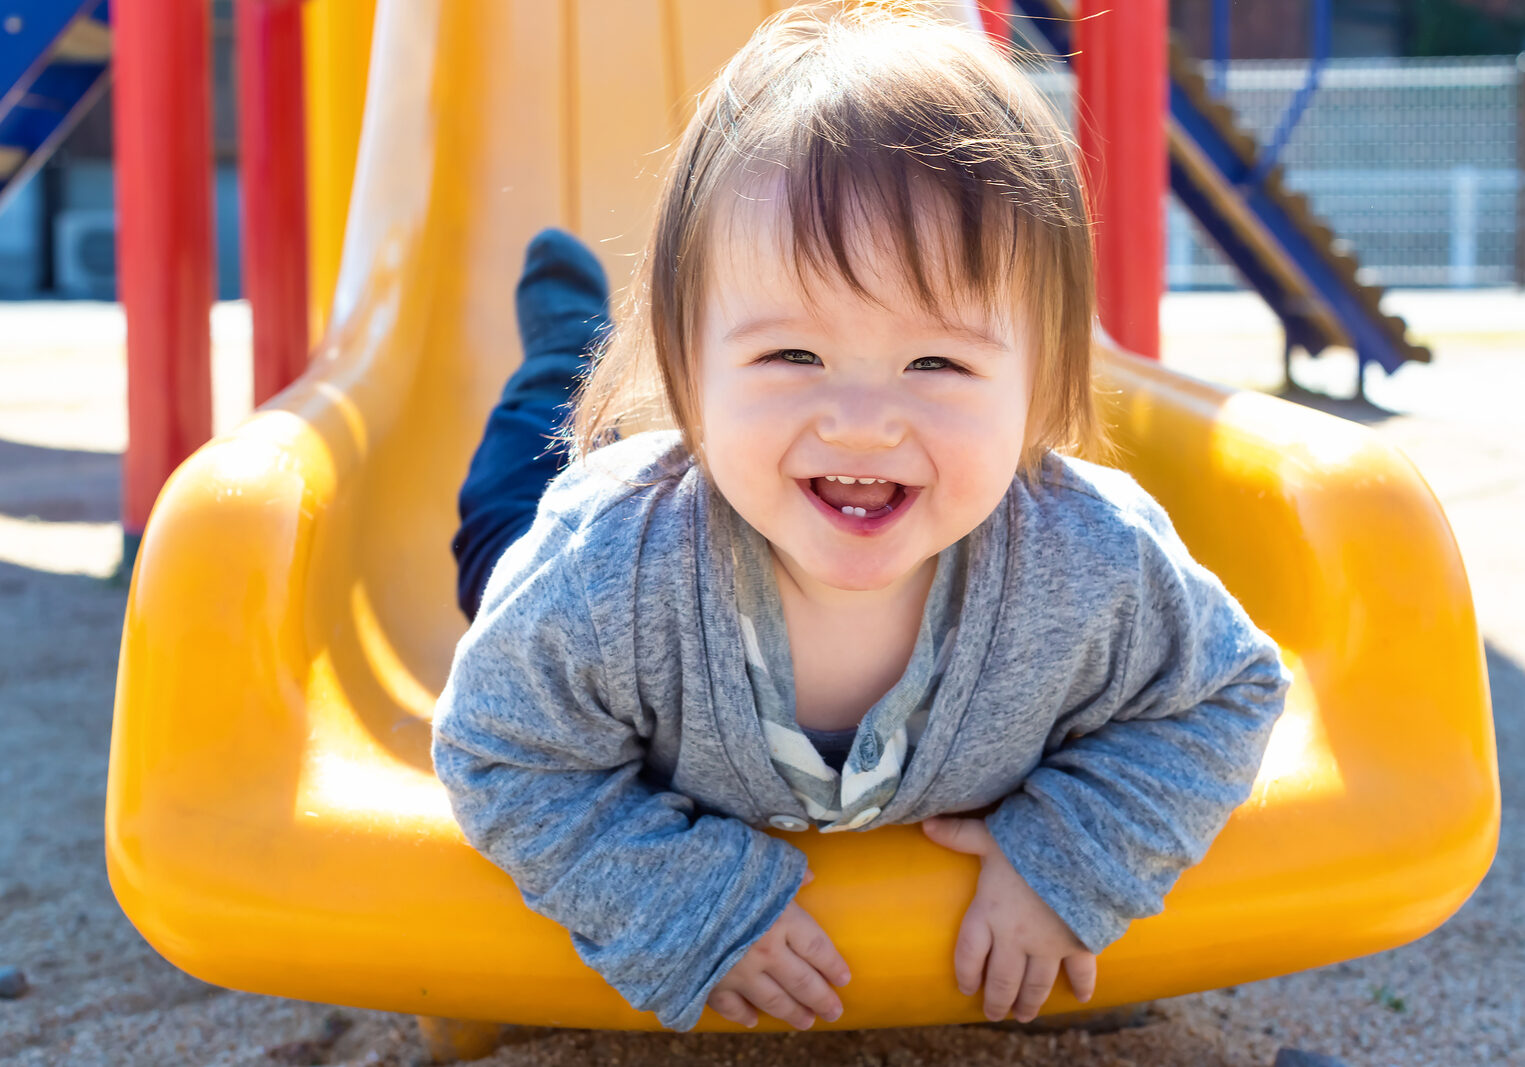 Mixed race toddler boy playing on a slide at a playground